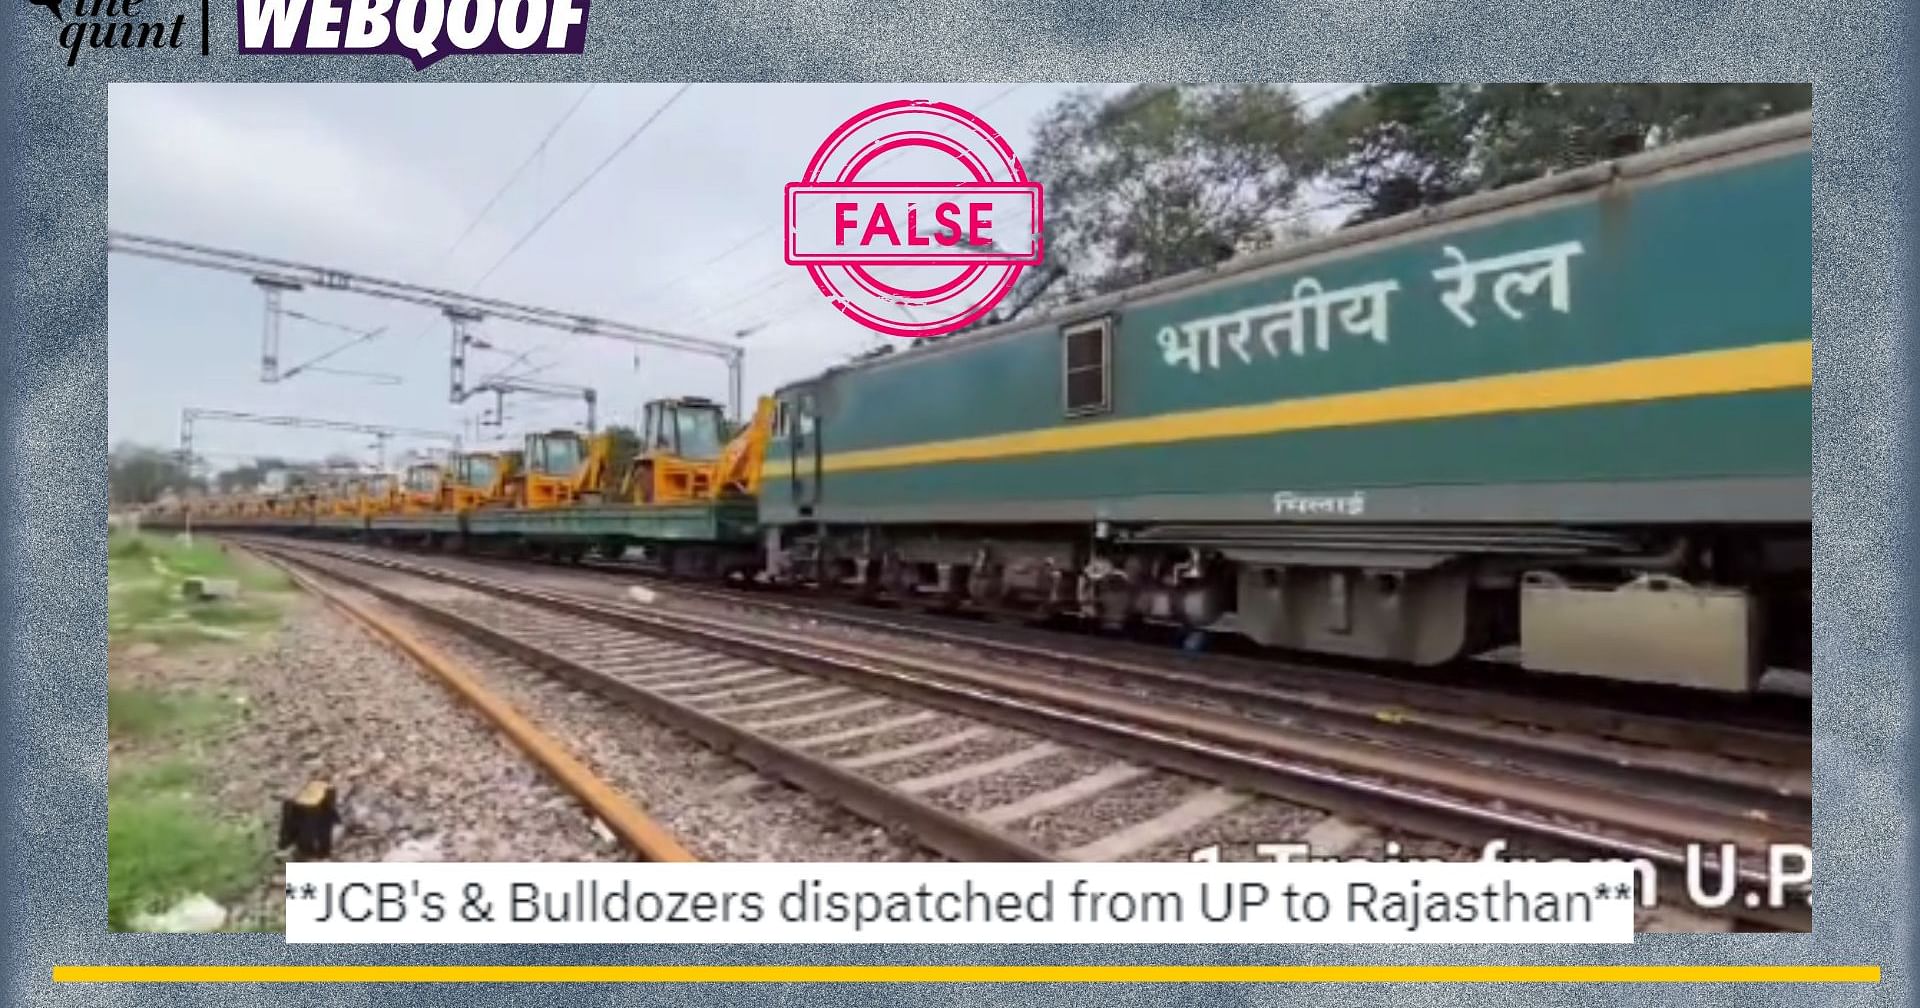 Does This Clip Show Train Carrying JCBs From UP to Rajasthan? No, It’s Old